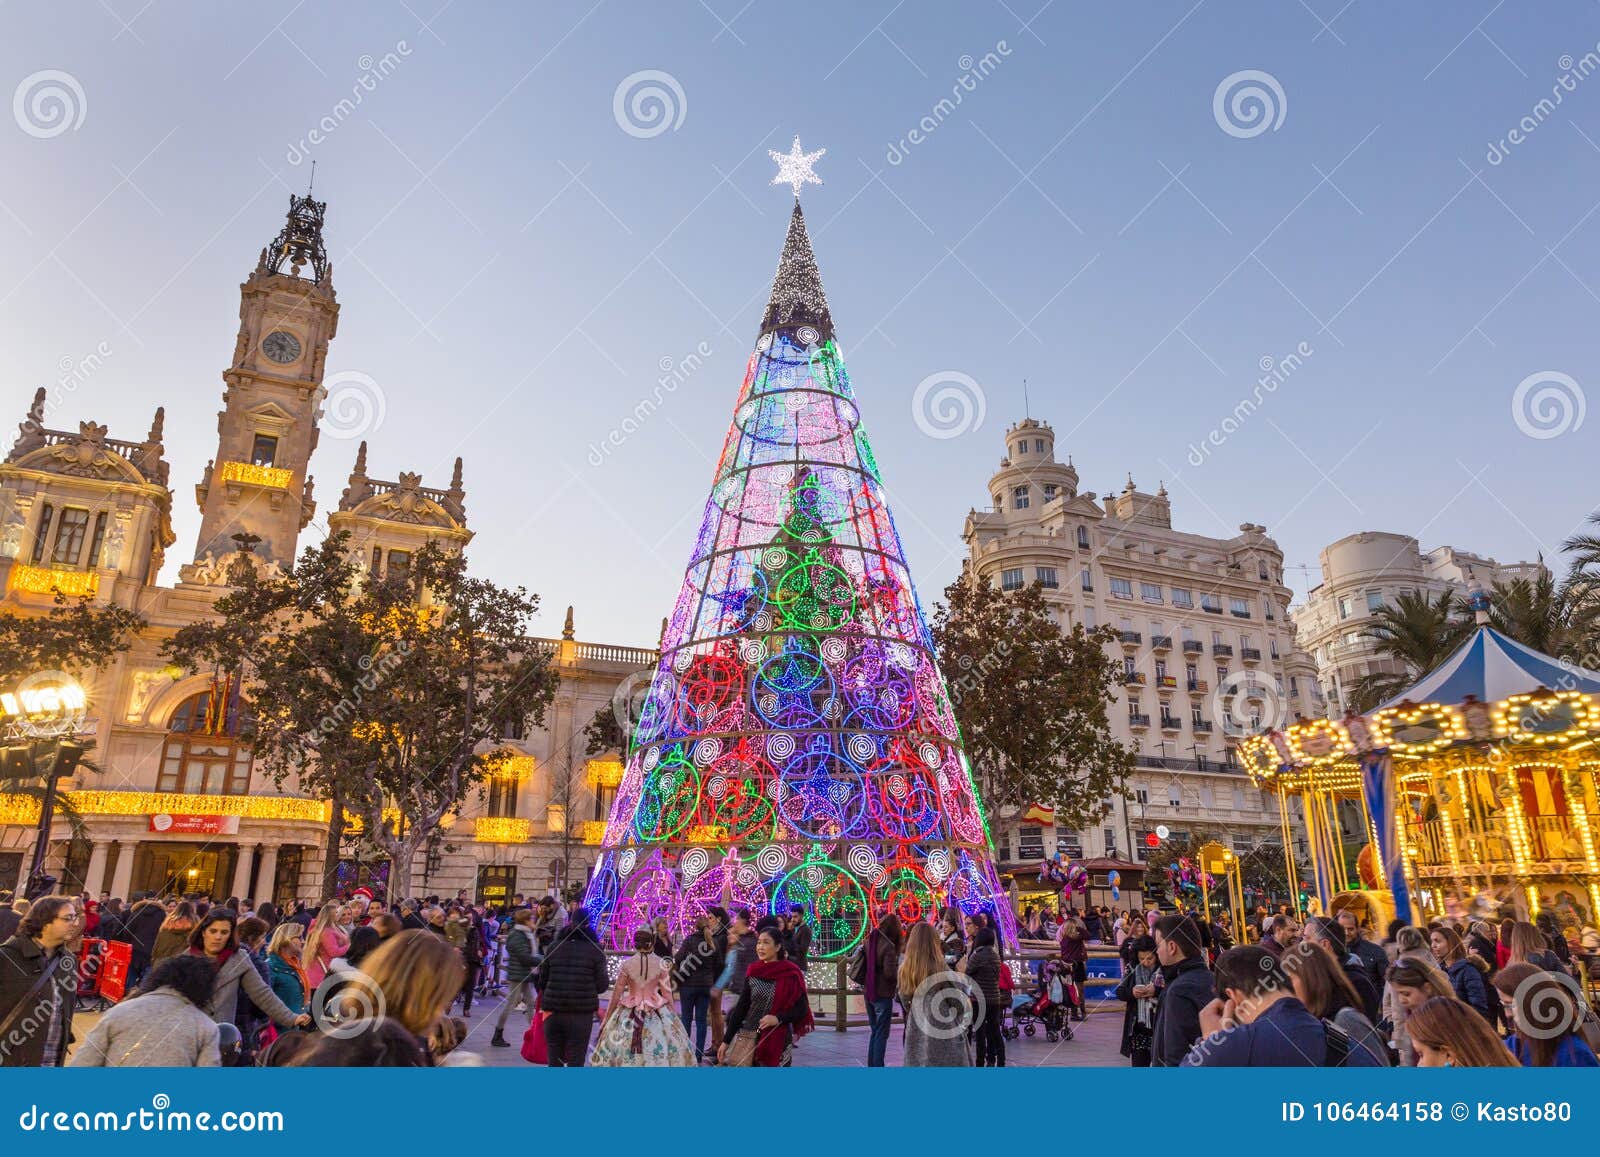 Christmas with Colorful Christmas Tree and Carousel on Modernisme Plaza of the City Hall of Valencia, Spain. Editorial Stock Photo - city, night: 106464158